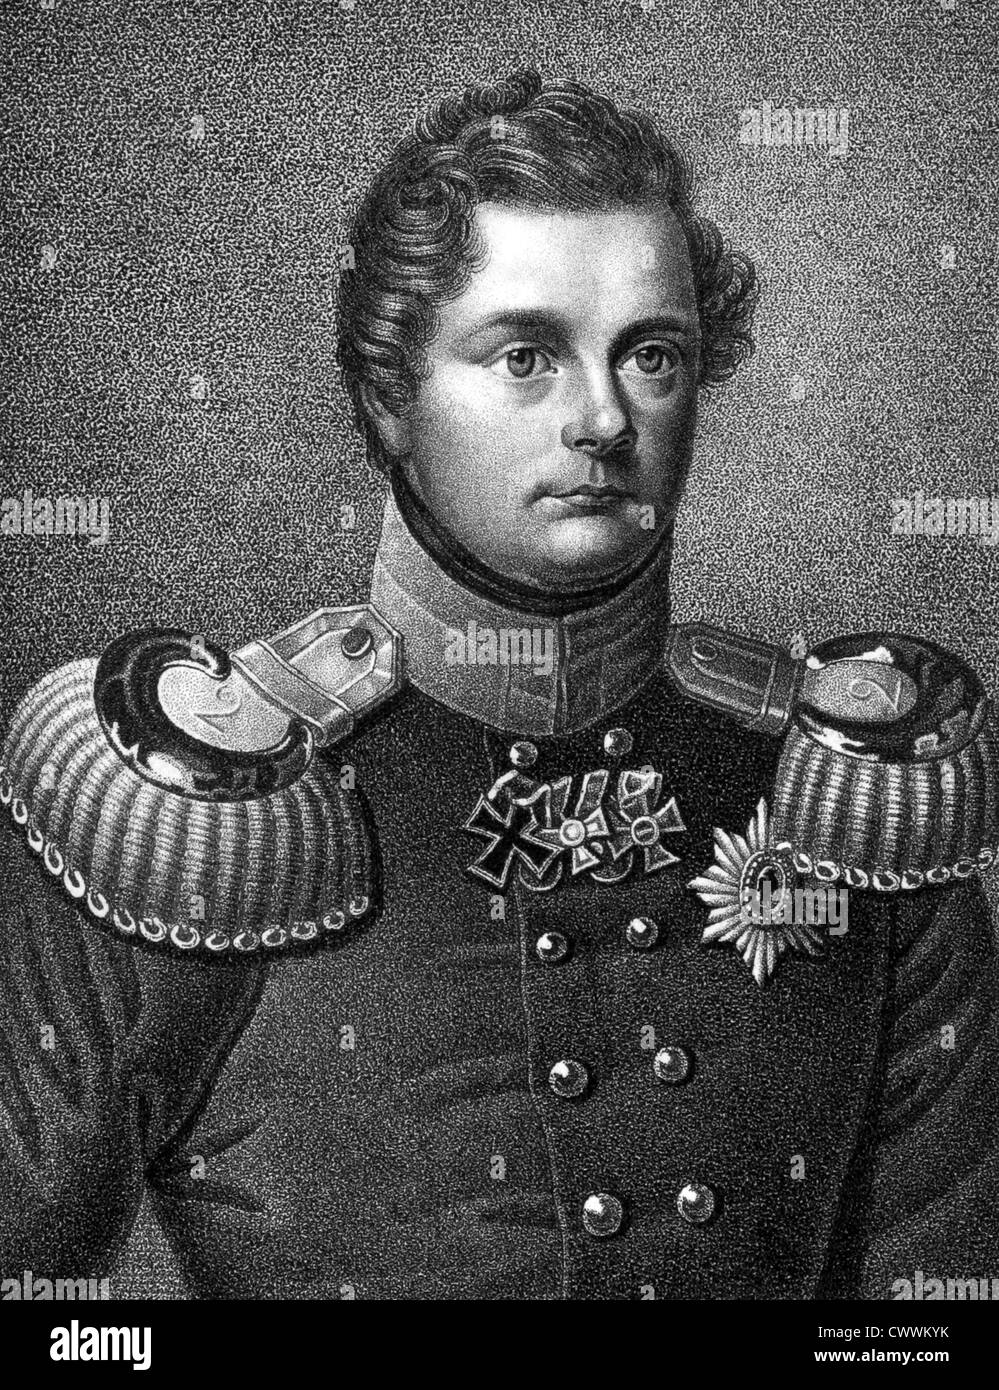 Frederick William IV of Prussia (1795-1861) on engraving from 1859. King of Prussia during 1840-1861. Stock Photo